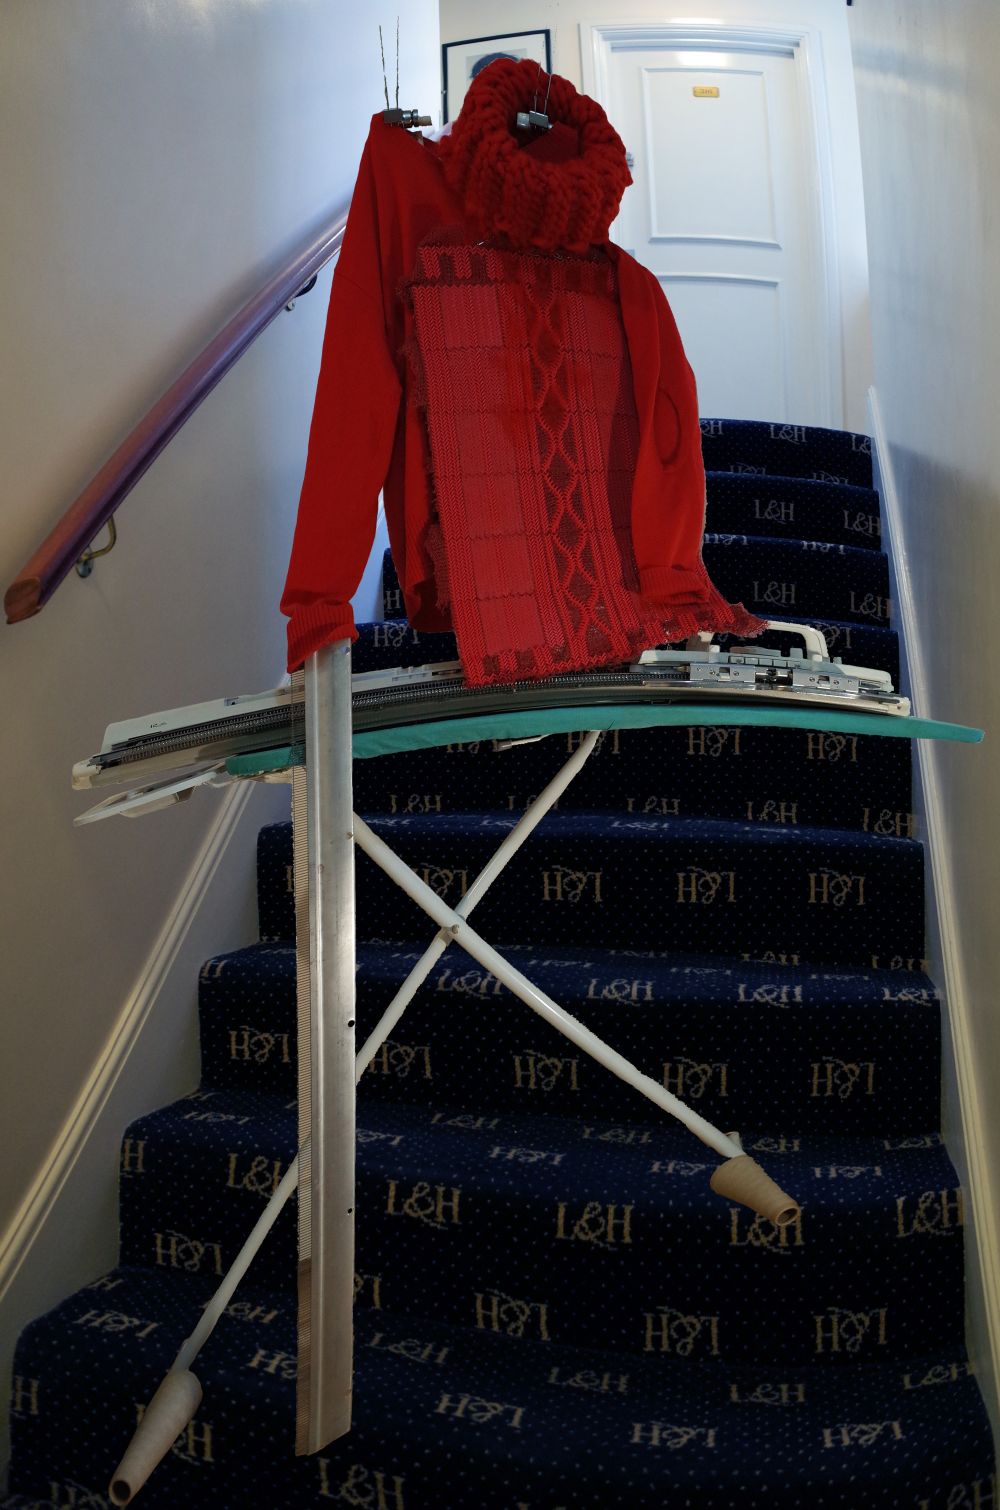 Handcrafted mannequin on staircase wearing a red knitted top.